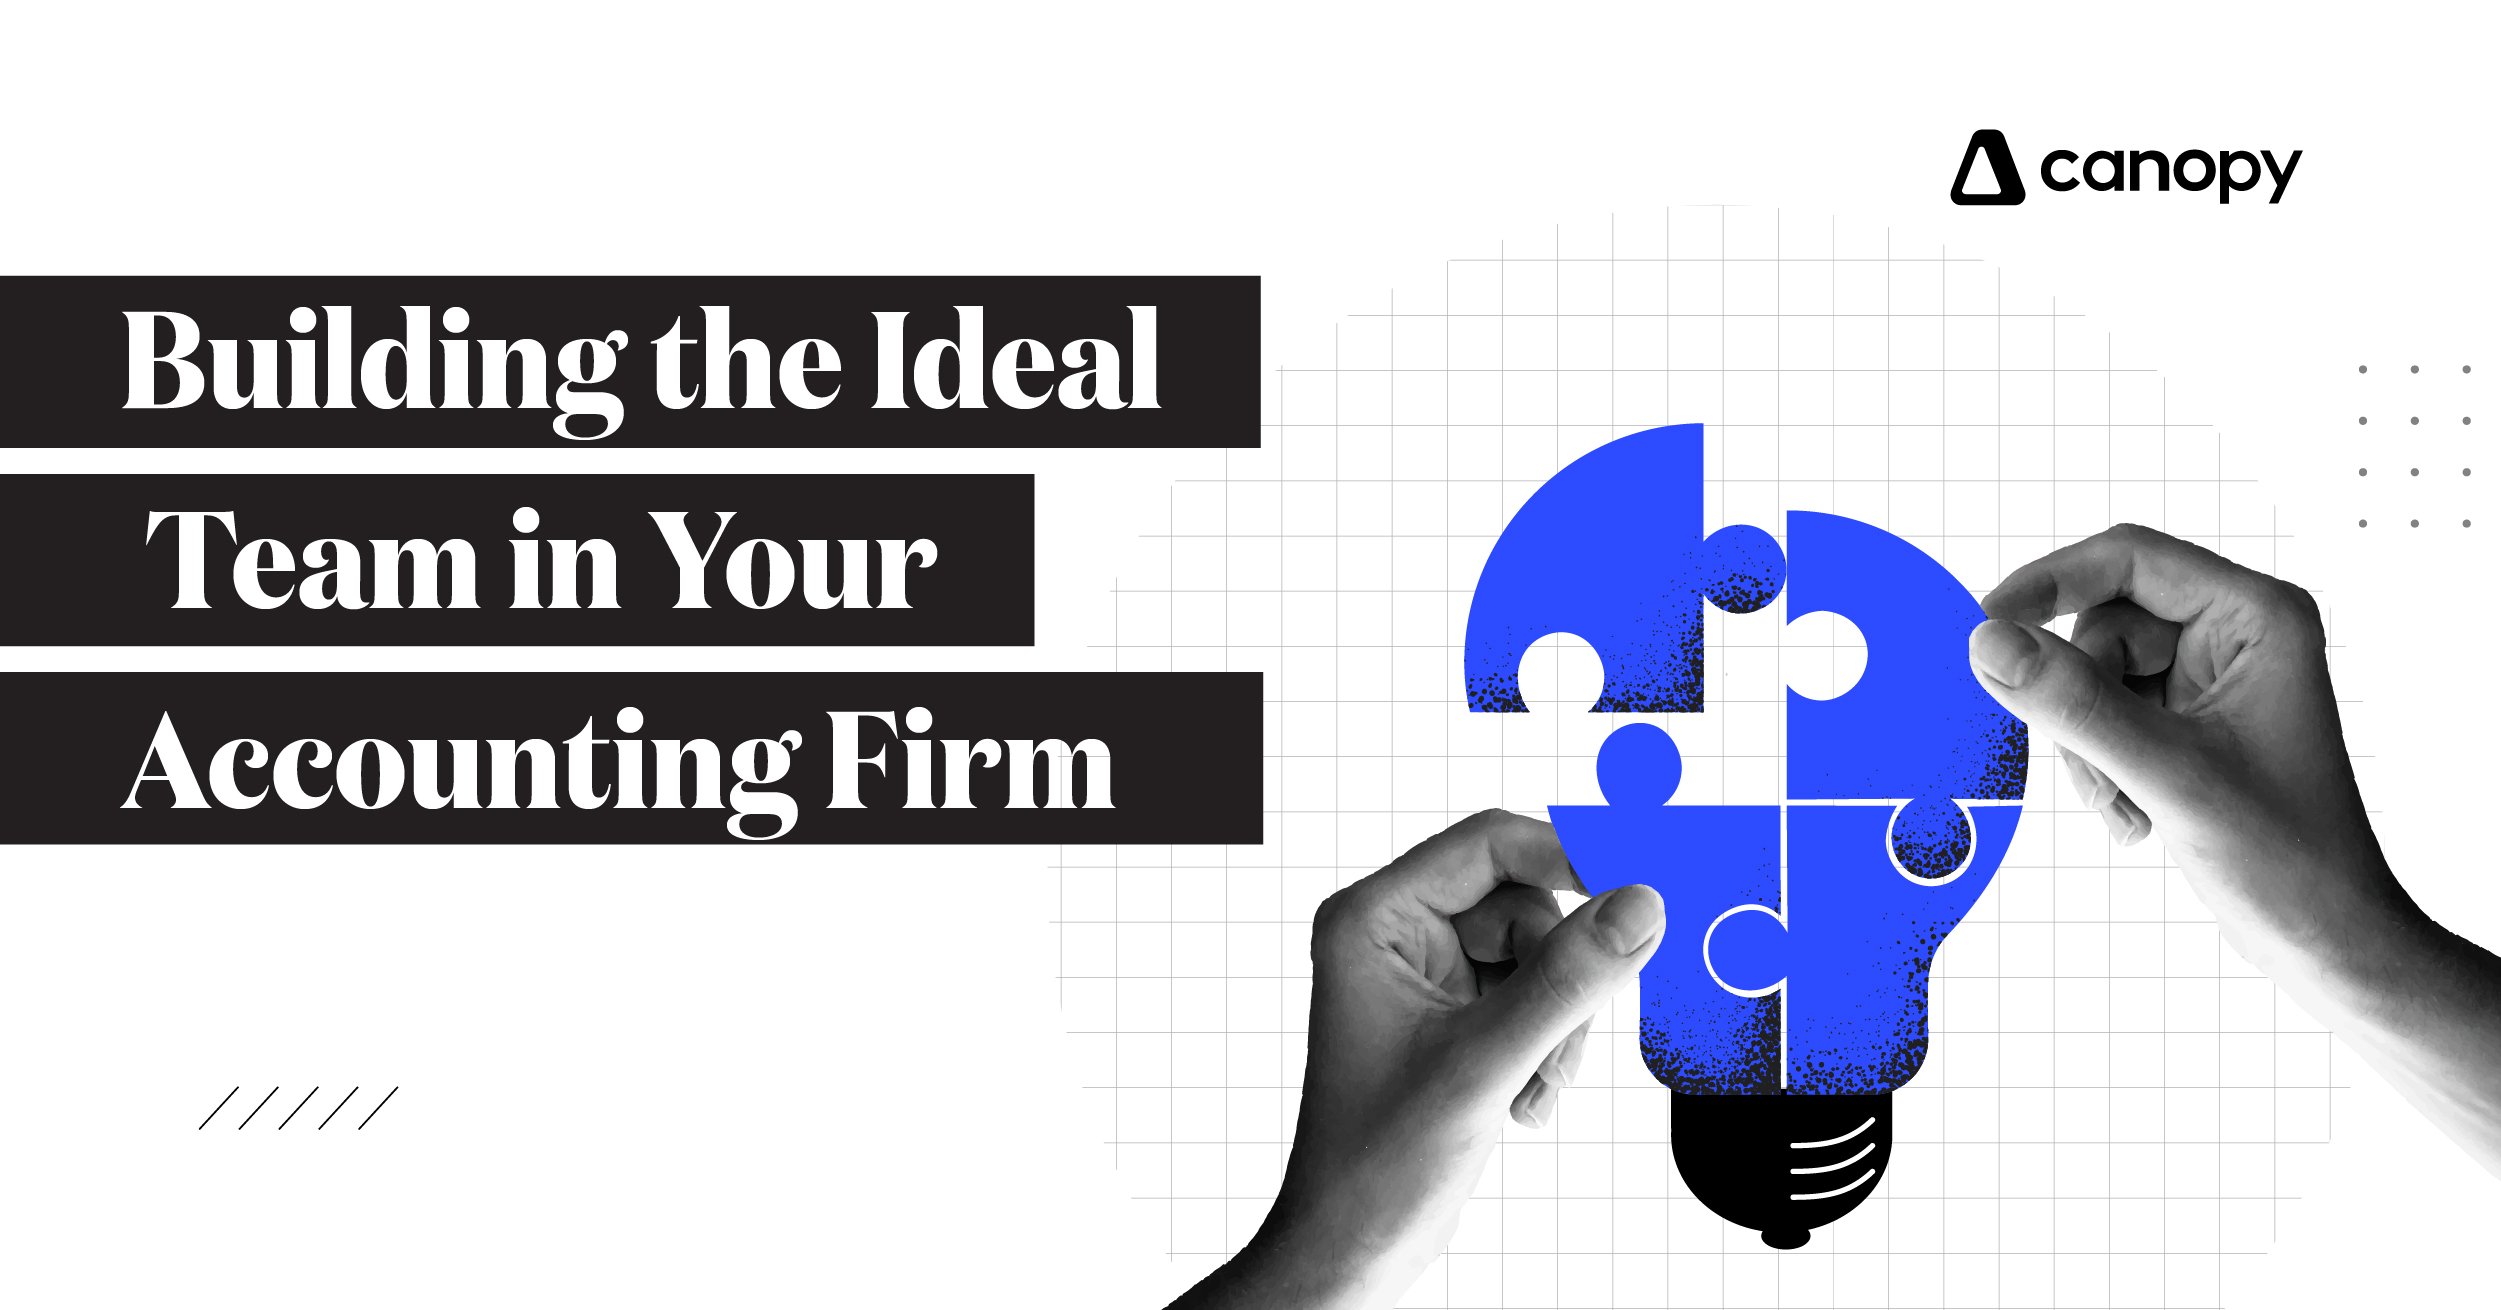 Building the Ideal Team in Your Accounting Firm